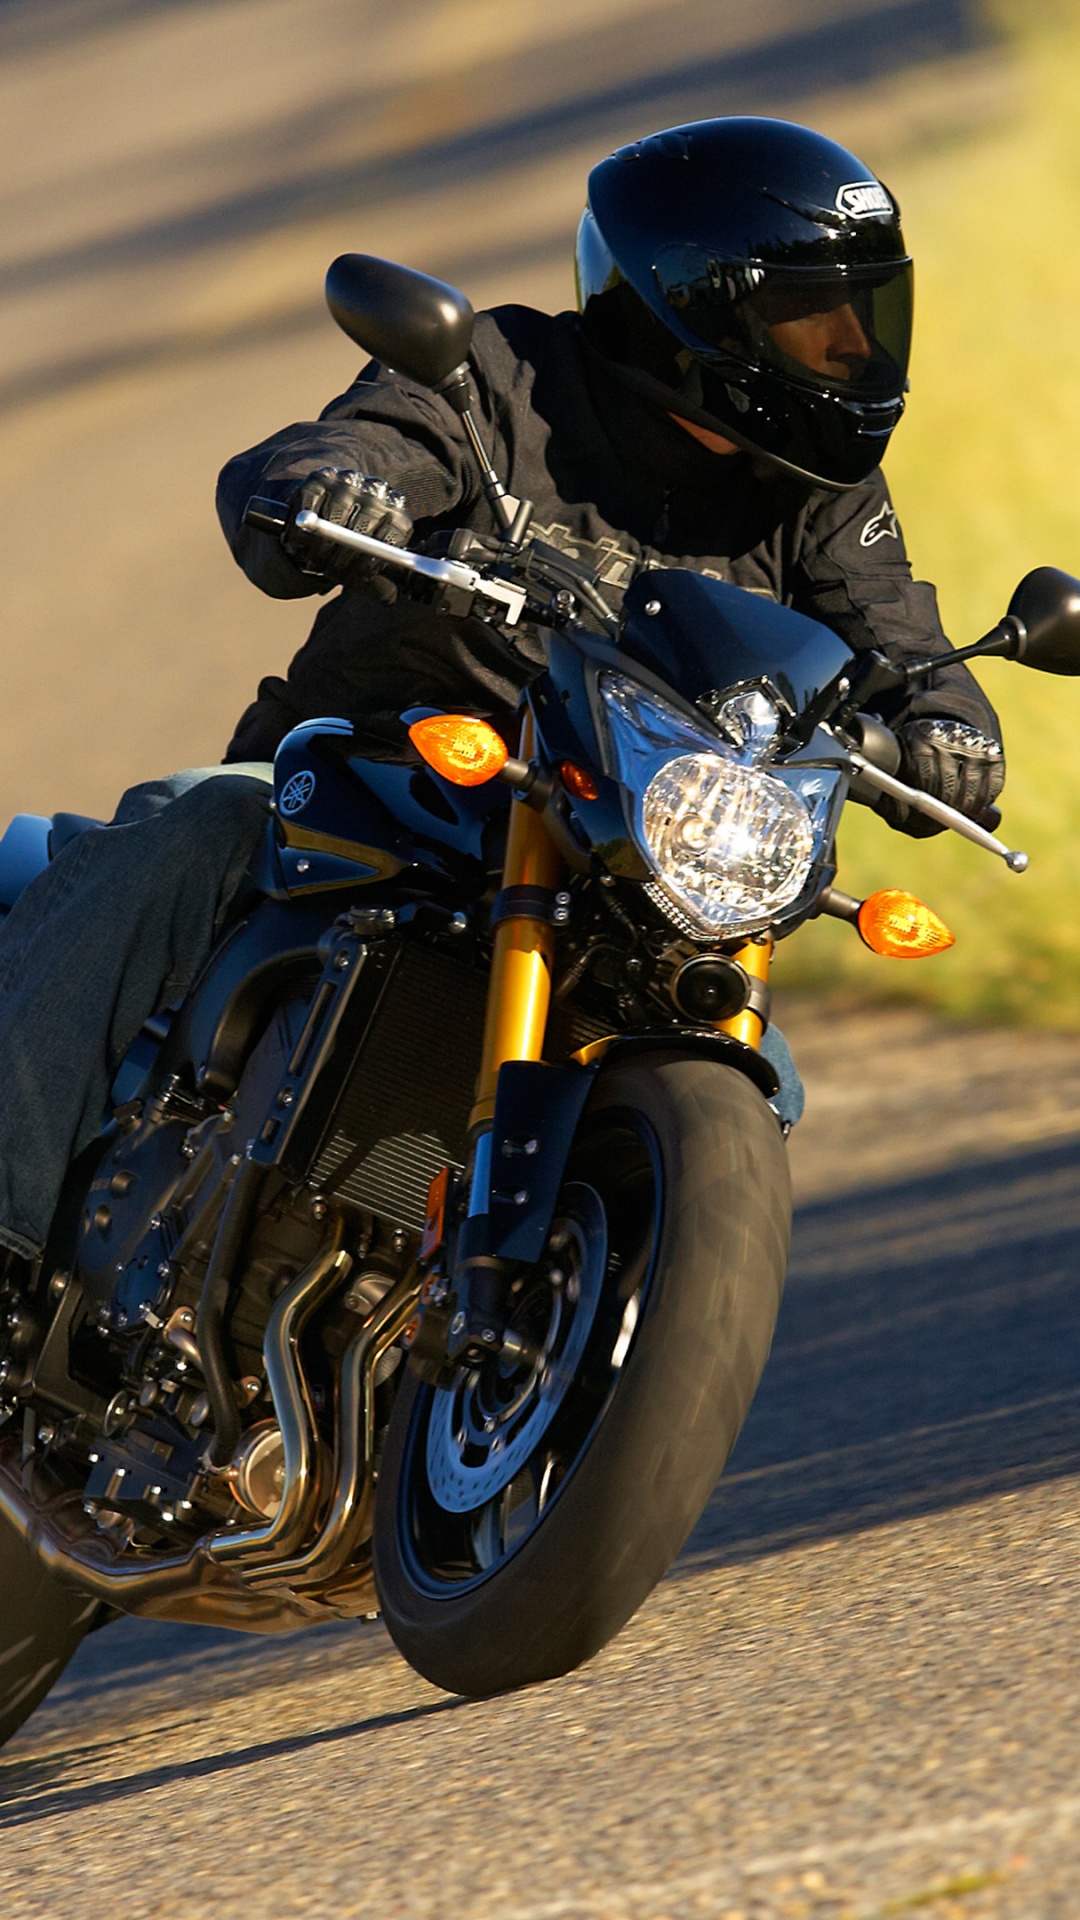 Man in Black Jacket Riding on Black Motorcycle on Road During Daytime. Wallpaper in 1080x1920 Resolution